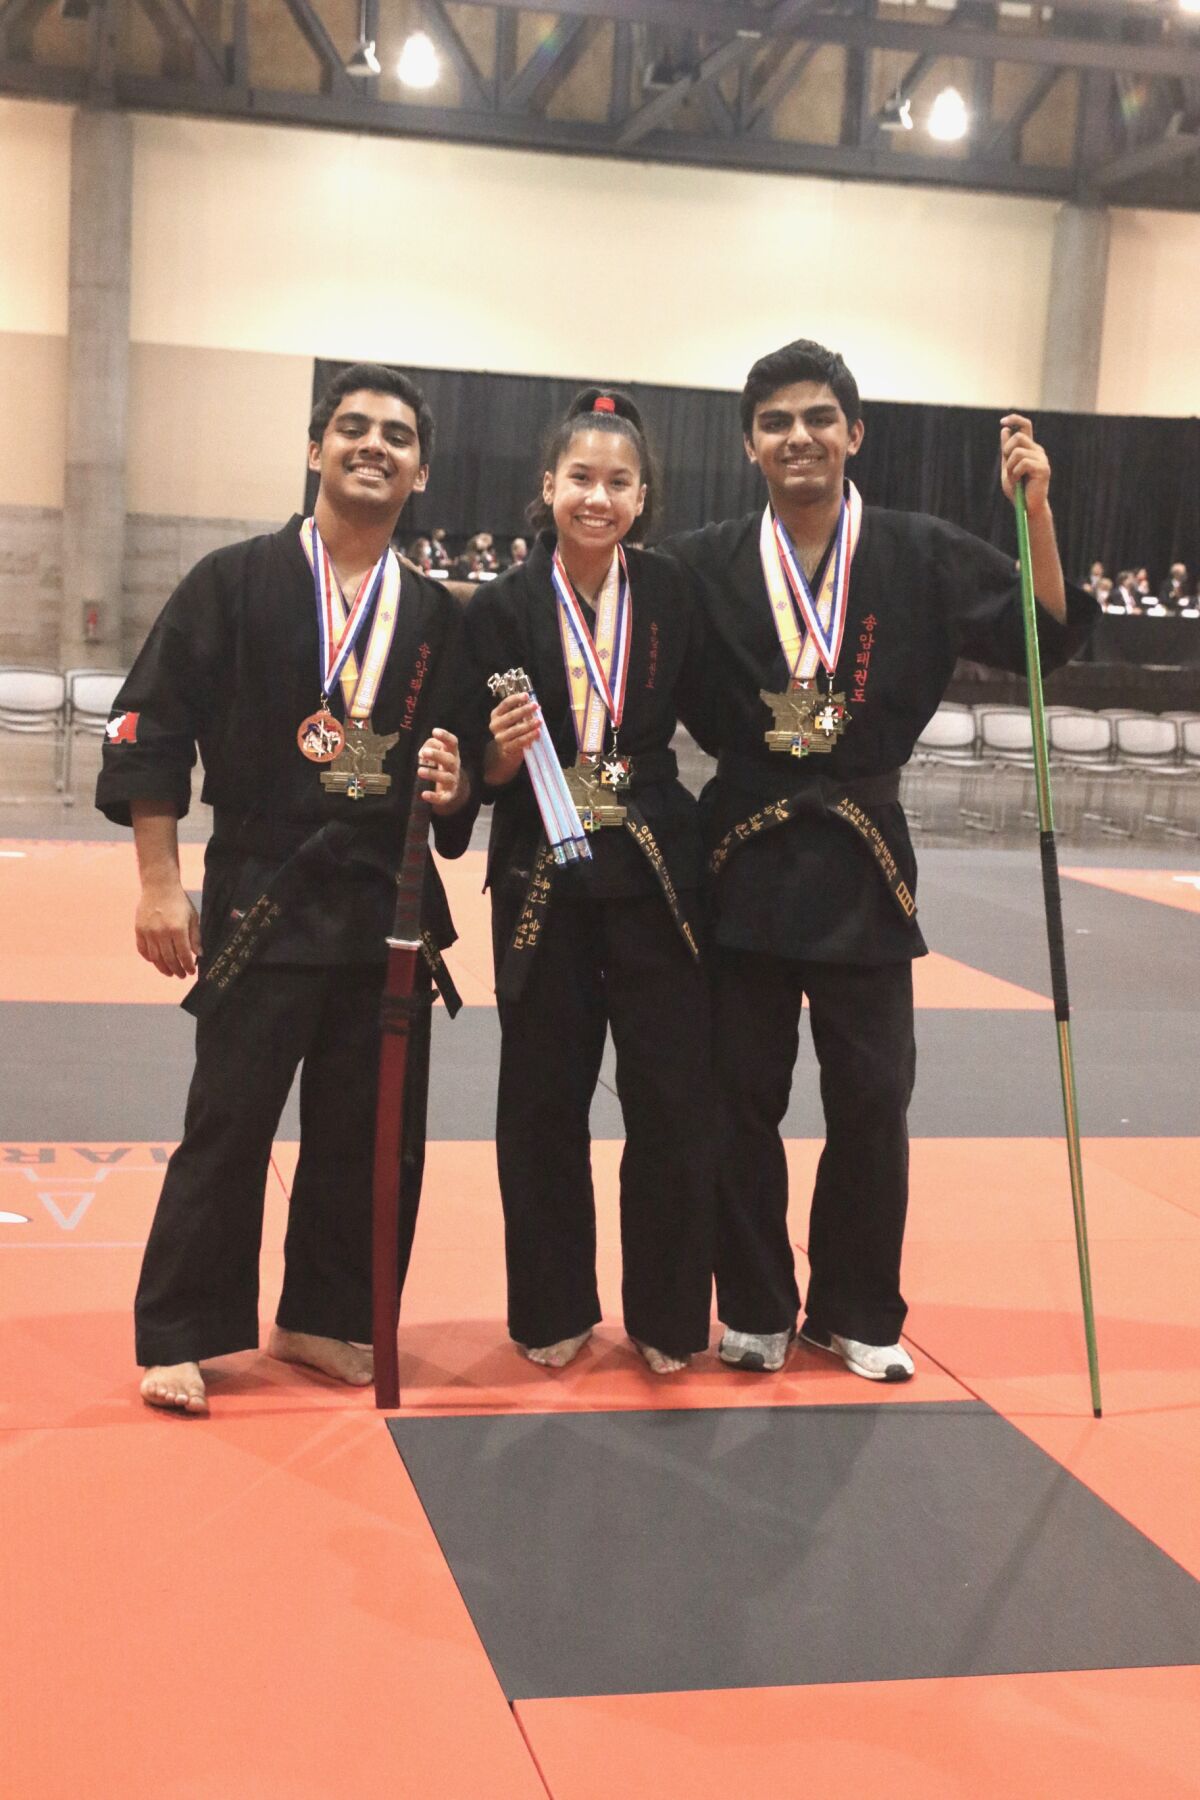 Bishop's School students Advay Chandra, Grace Dabir and Aarav Chandra are tae kwon do medalists.